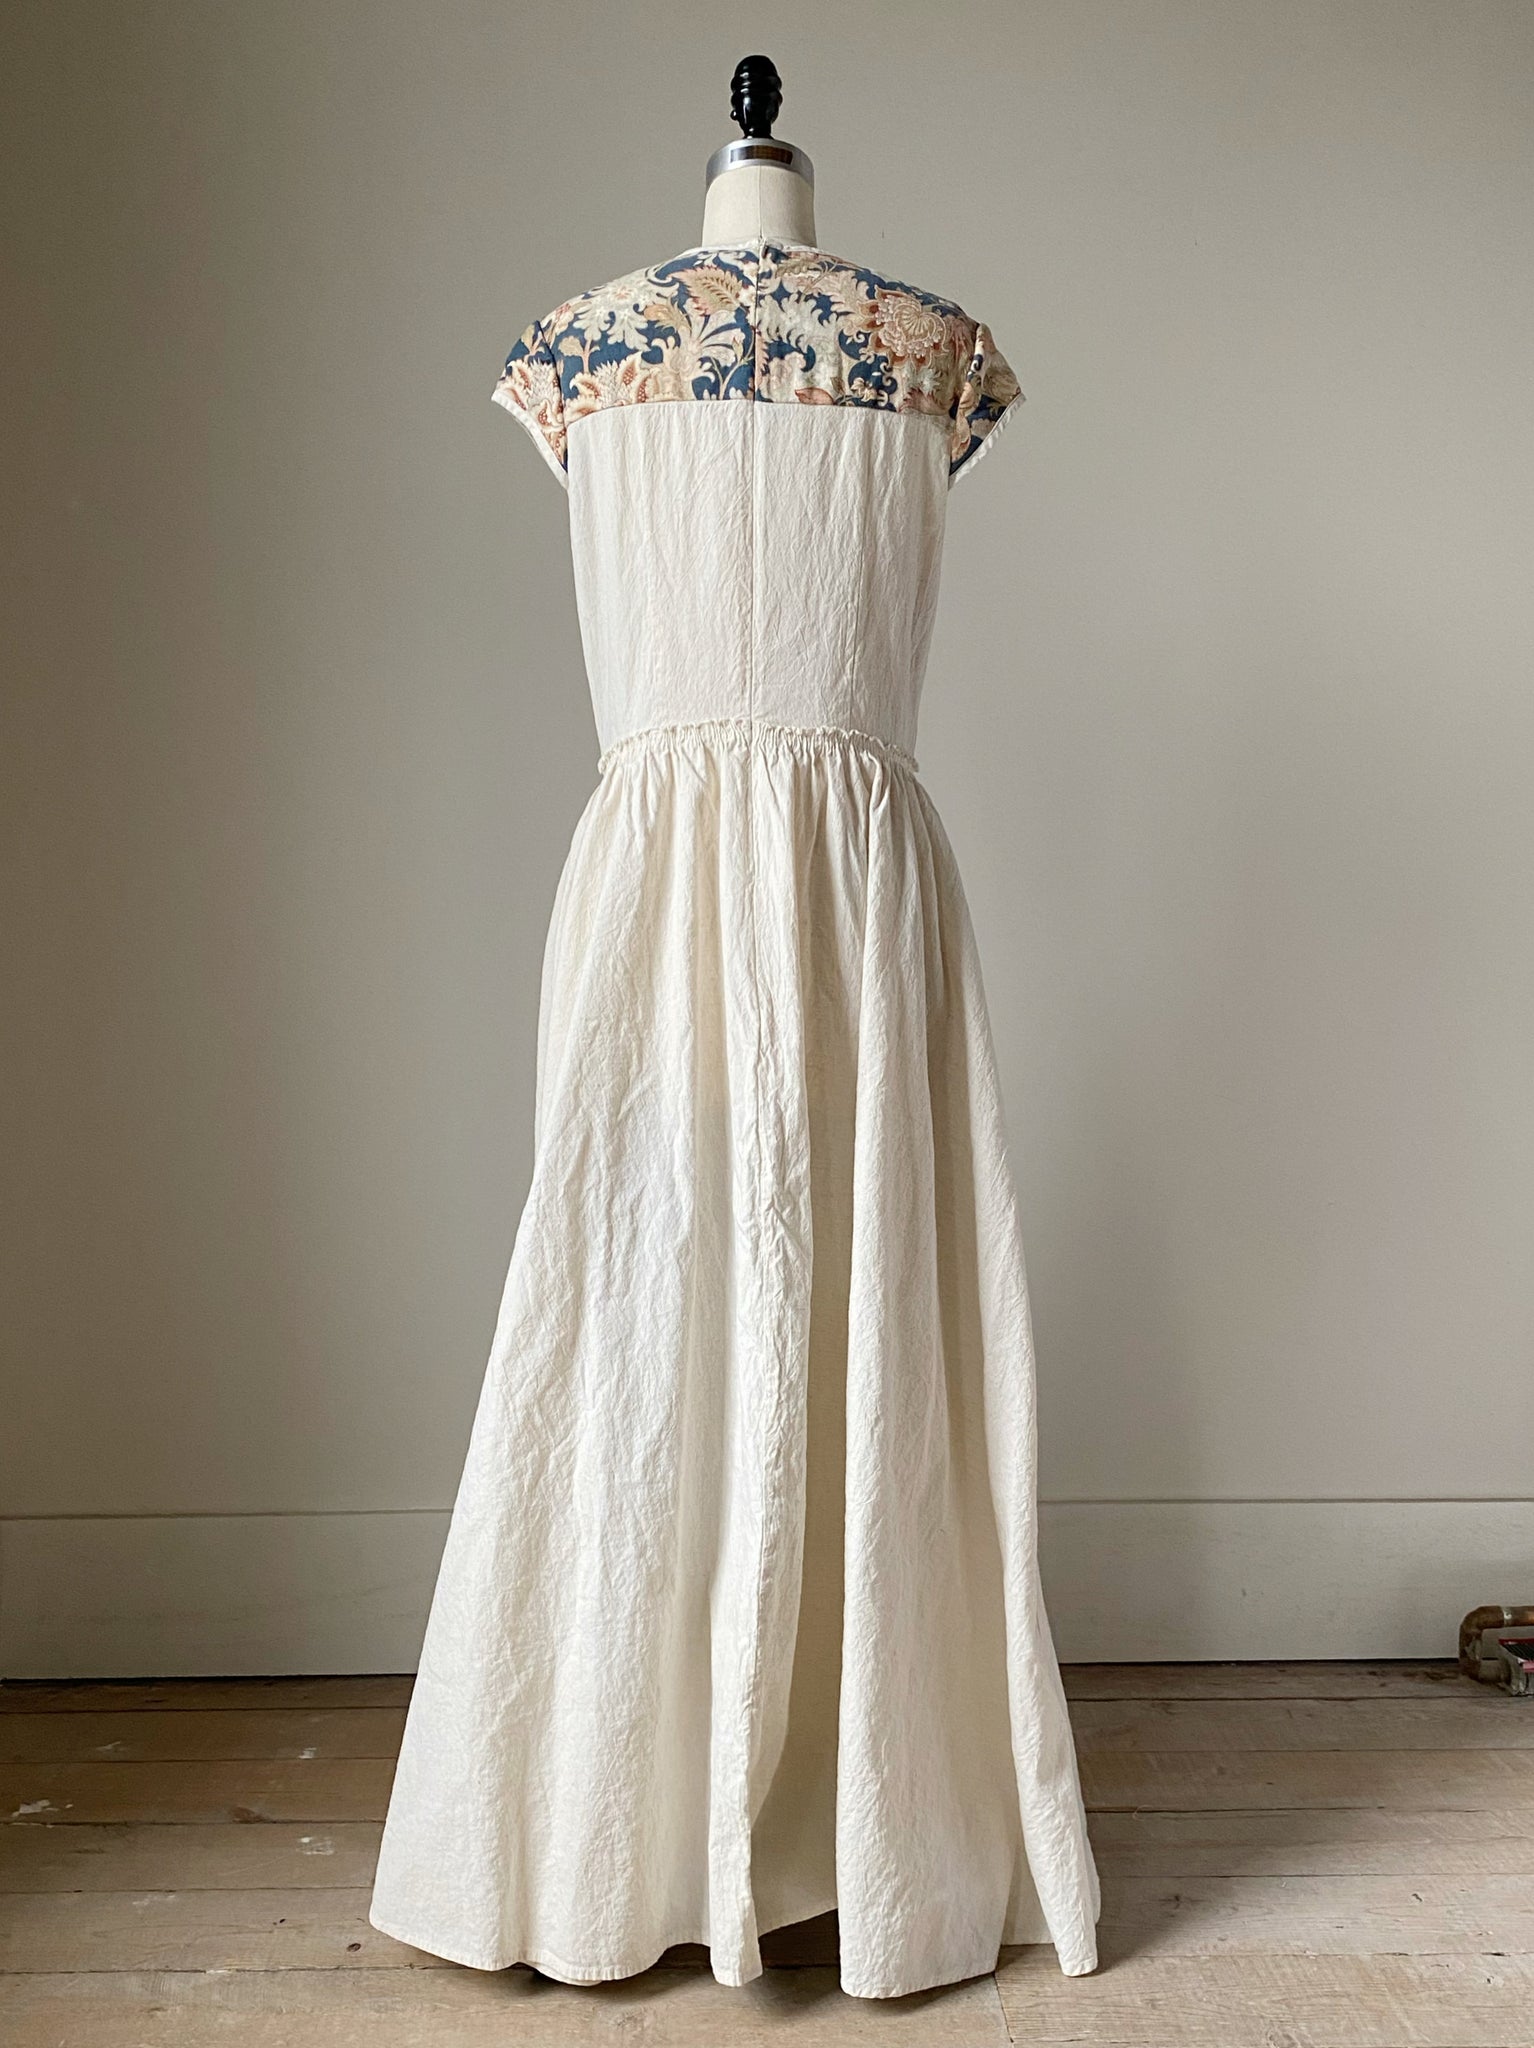 19th century jacobian floral  patched lillian dress long s